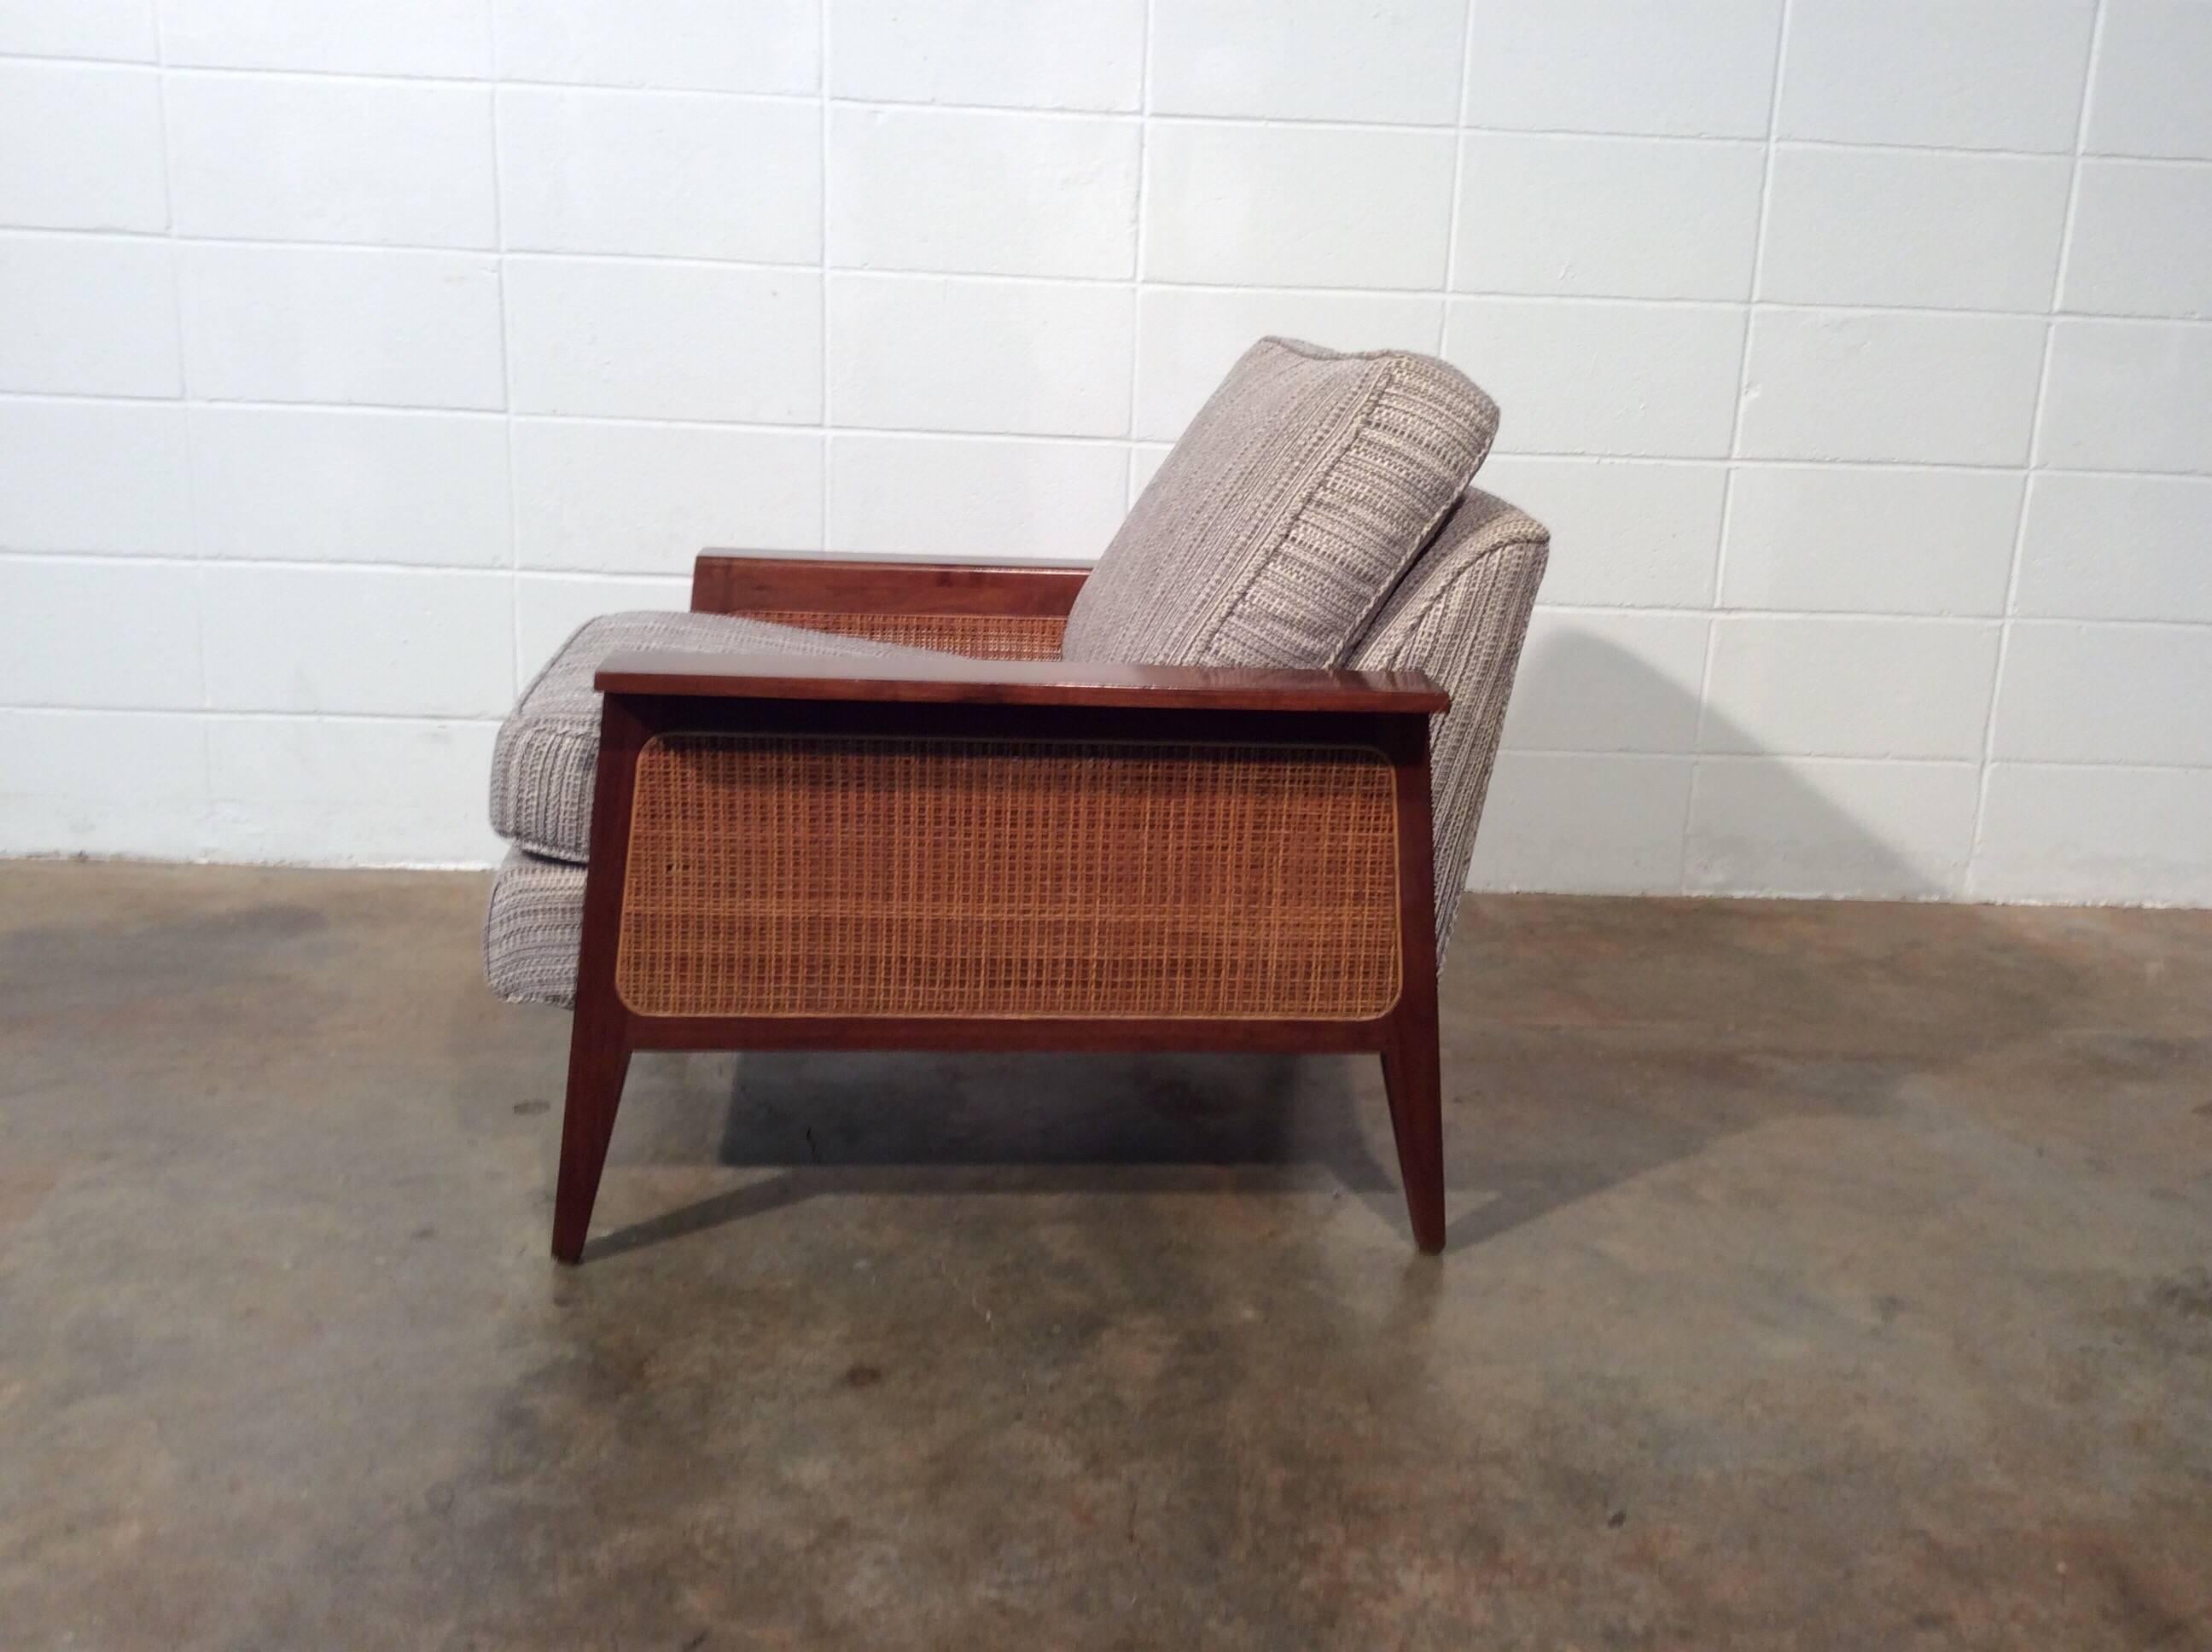 Unique and Restored Mid-Century Modern Chair by Iconic Galloways of Tampa 3